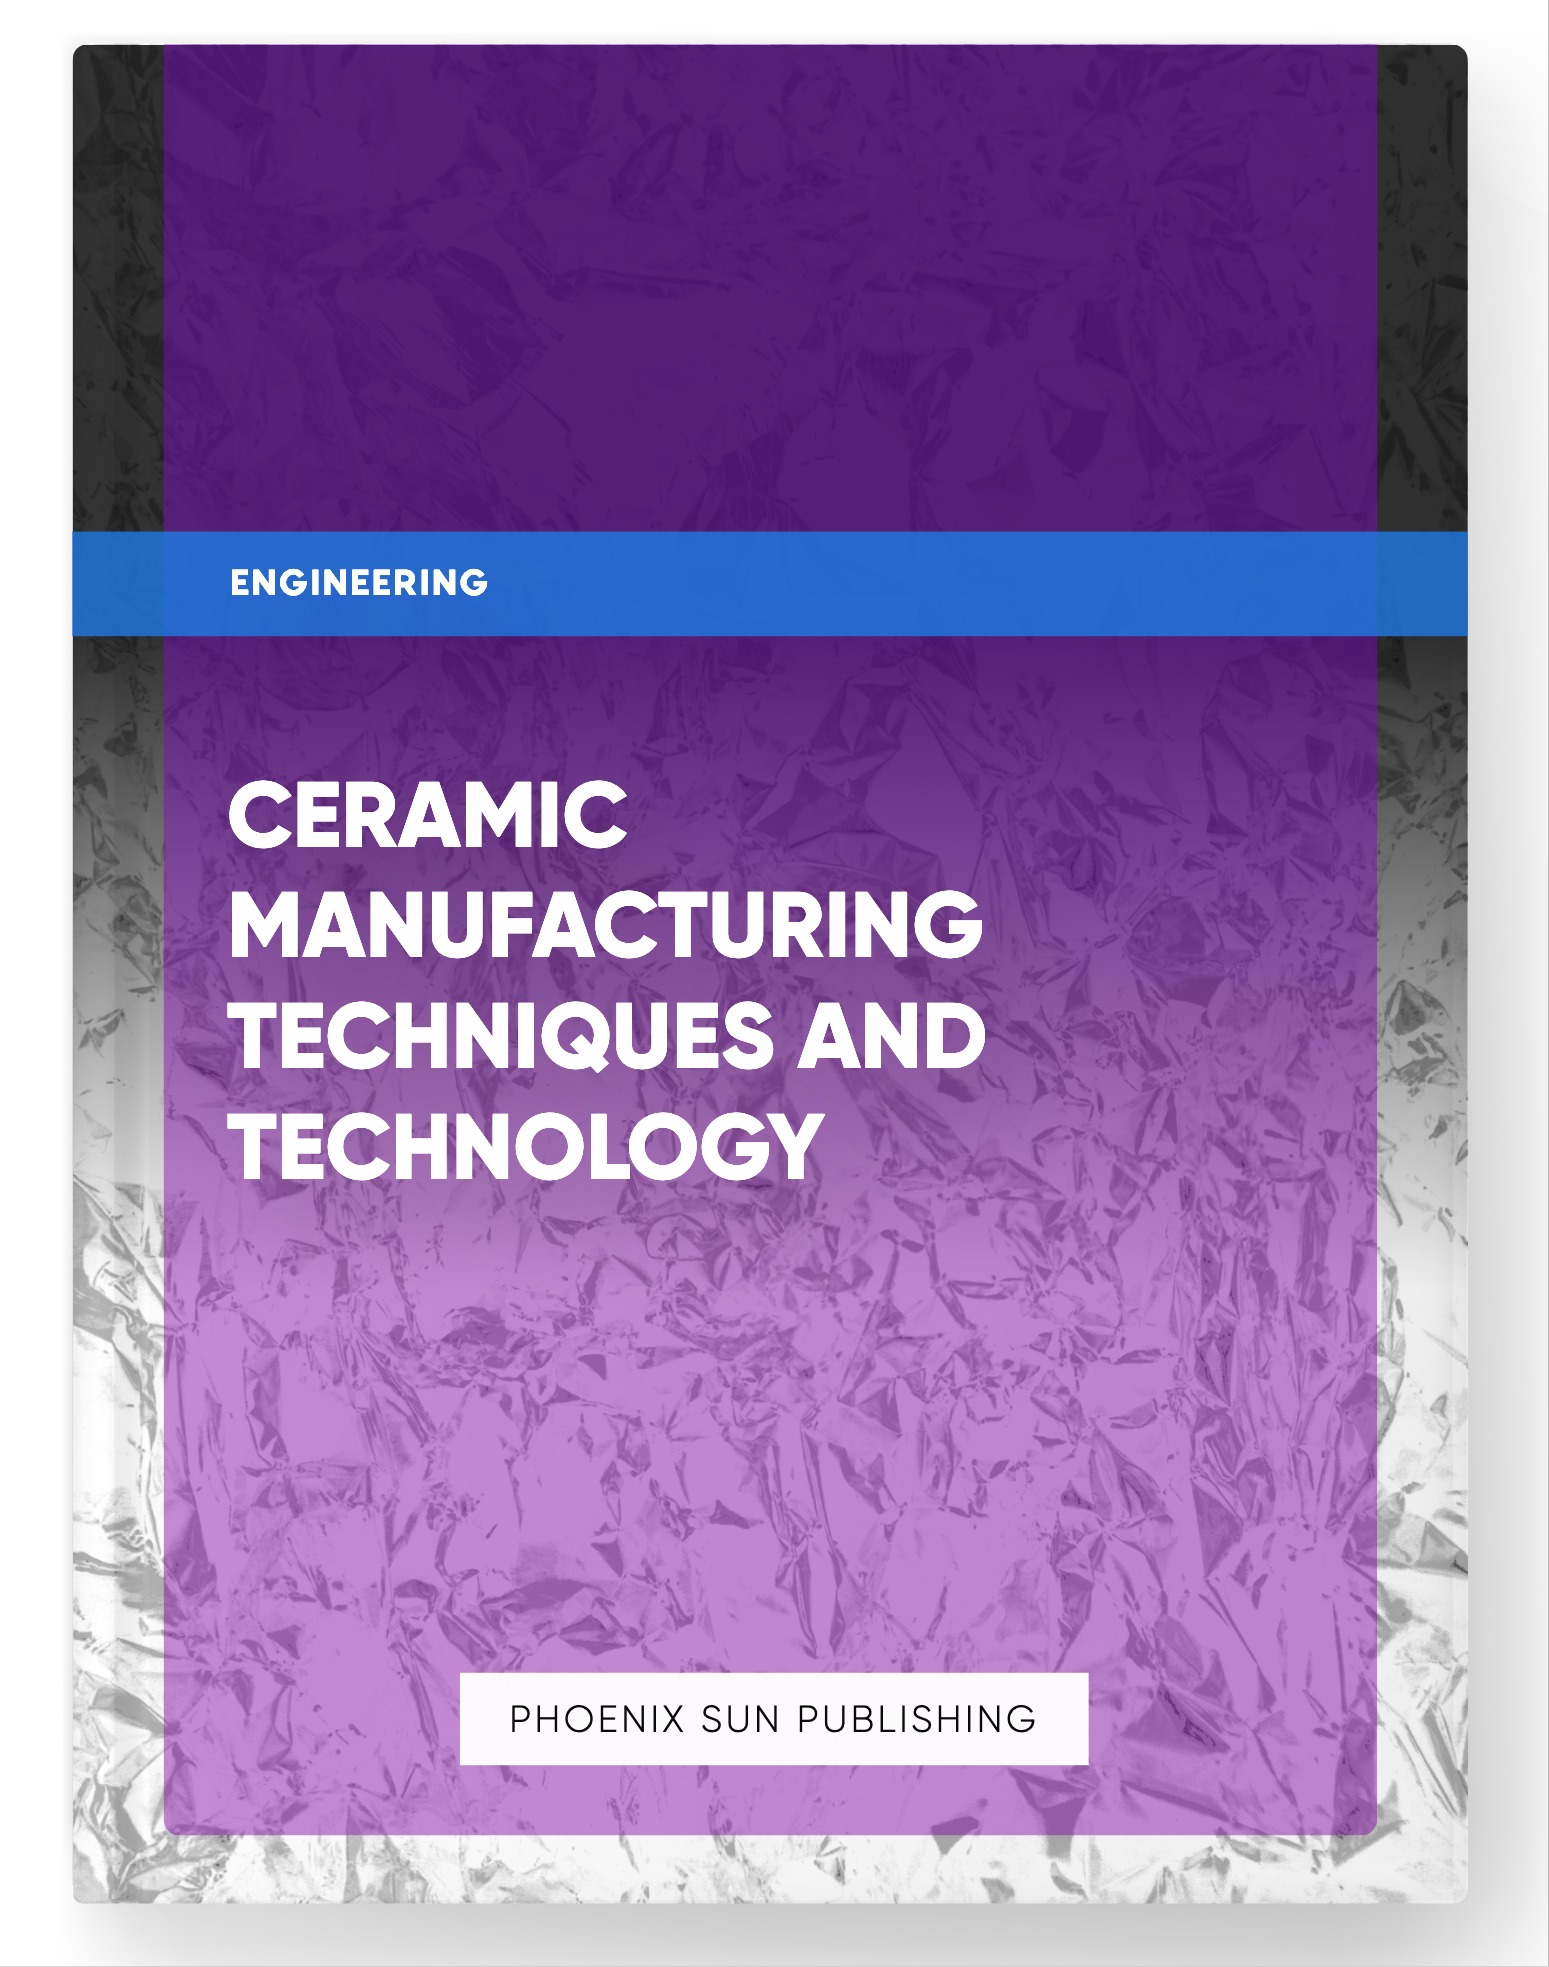 Ceramic Manufacturing Techniques and Technology